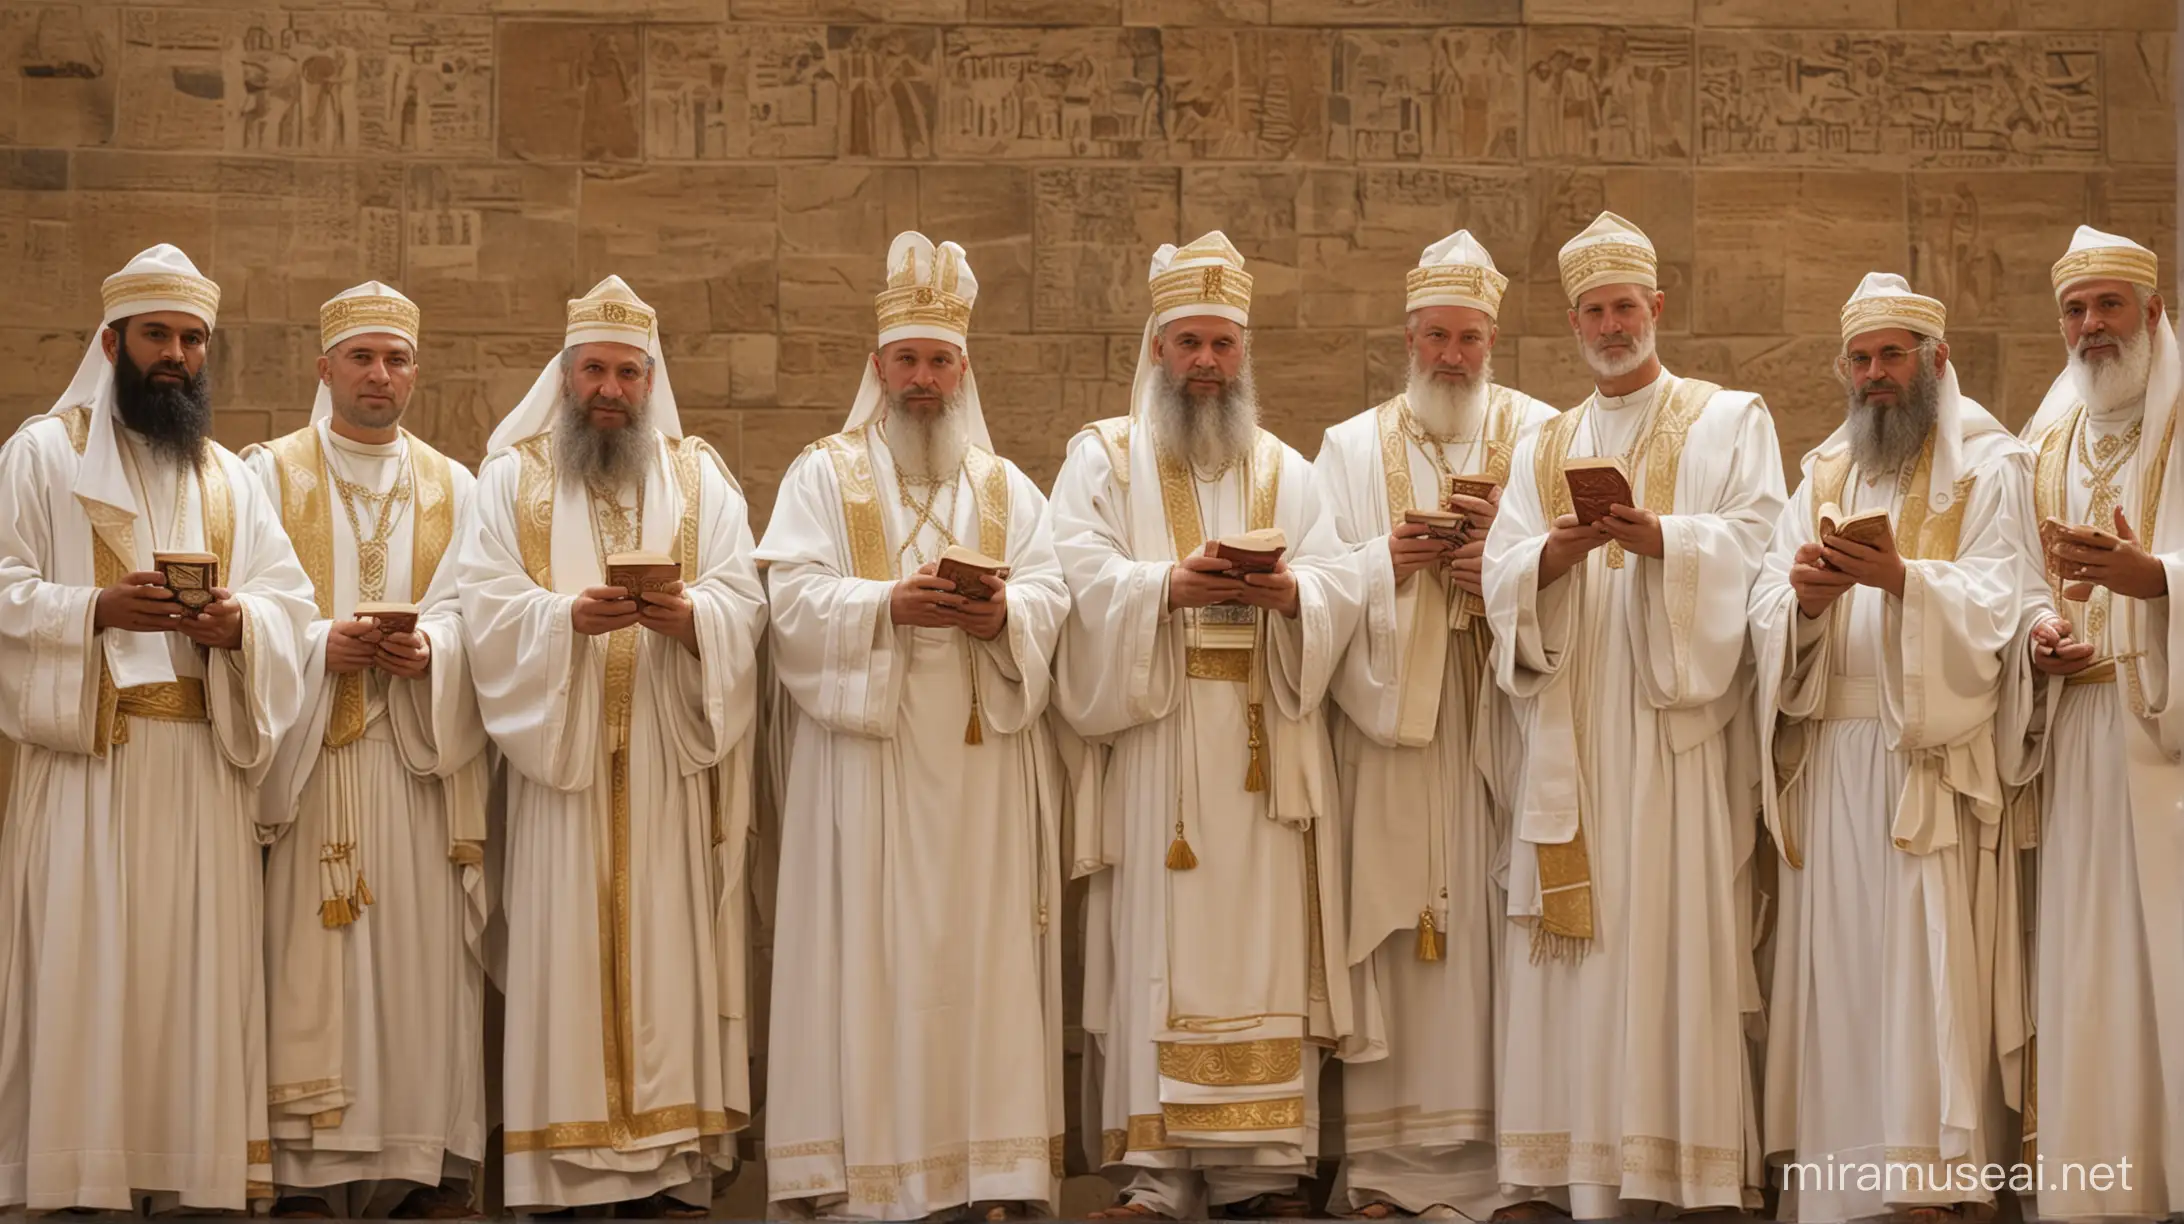 The duties and responsibilities of the levitical priests
